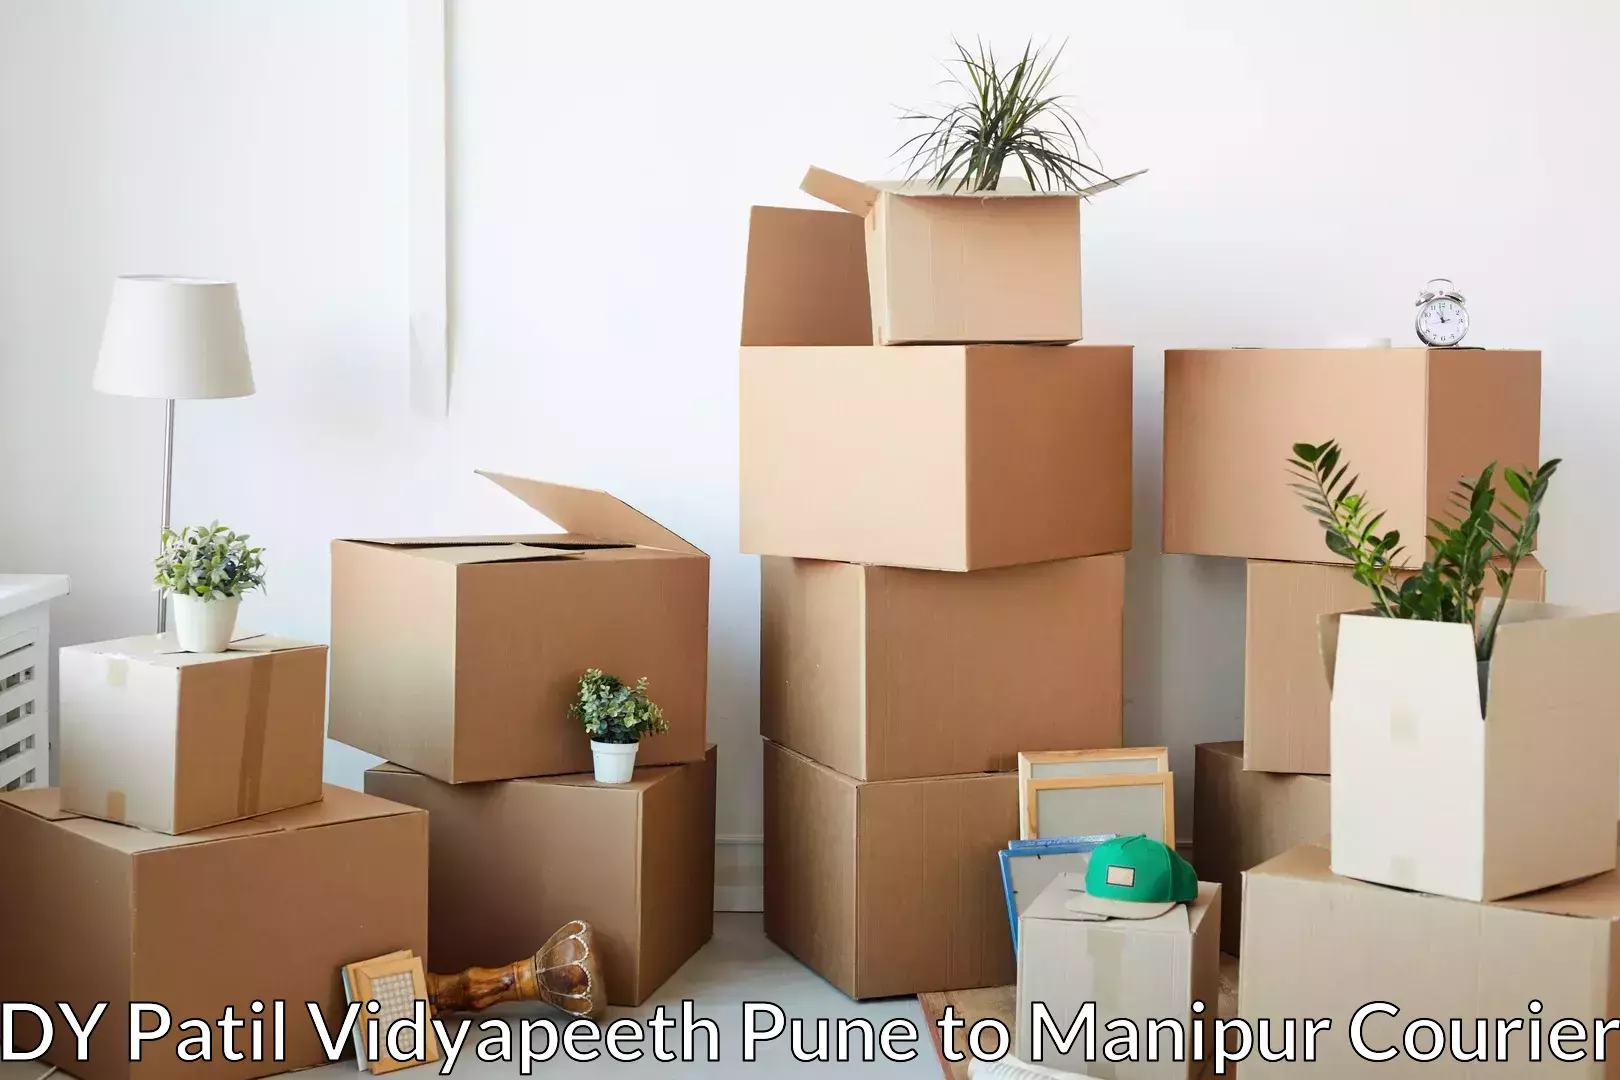 Residential furniture movers DY Patil Vidyapeeth Pune to Manipur